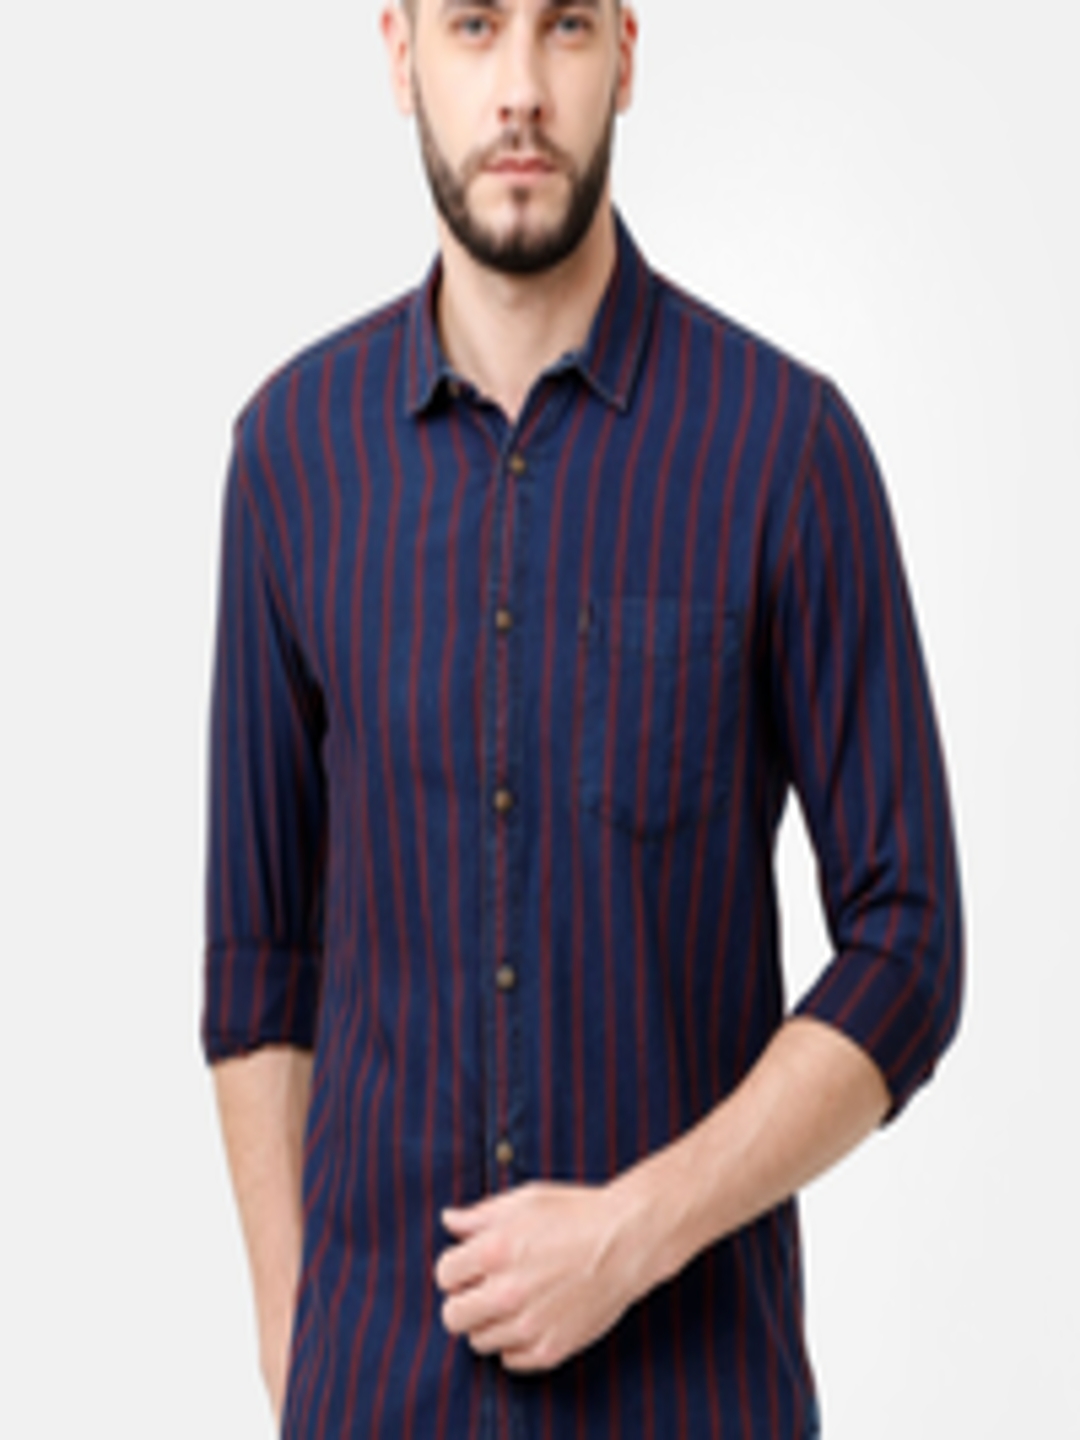 Buy Voi Jeans Men Navy Blue & Red Slim Fit Striped Casual Shirt ...